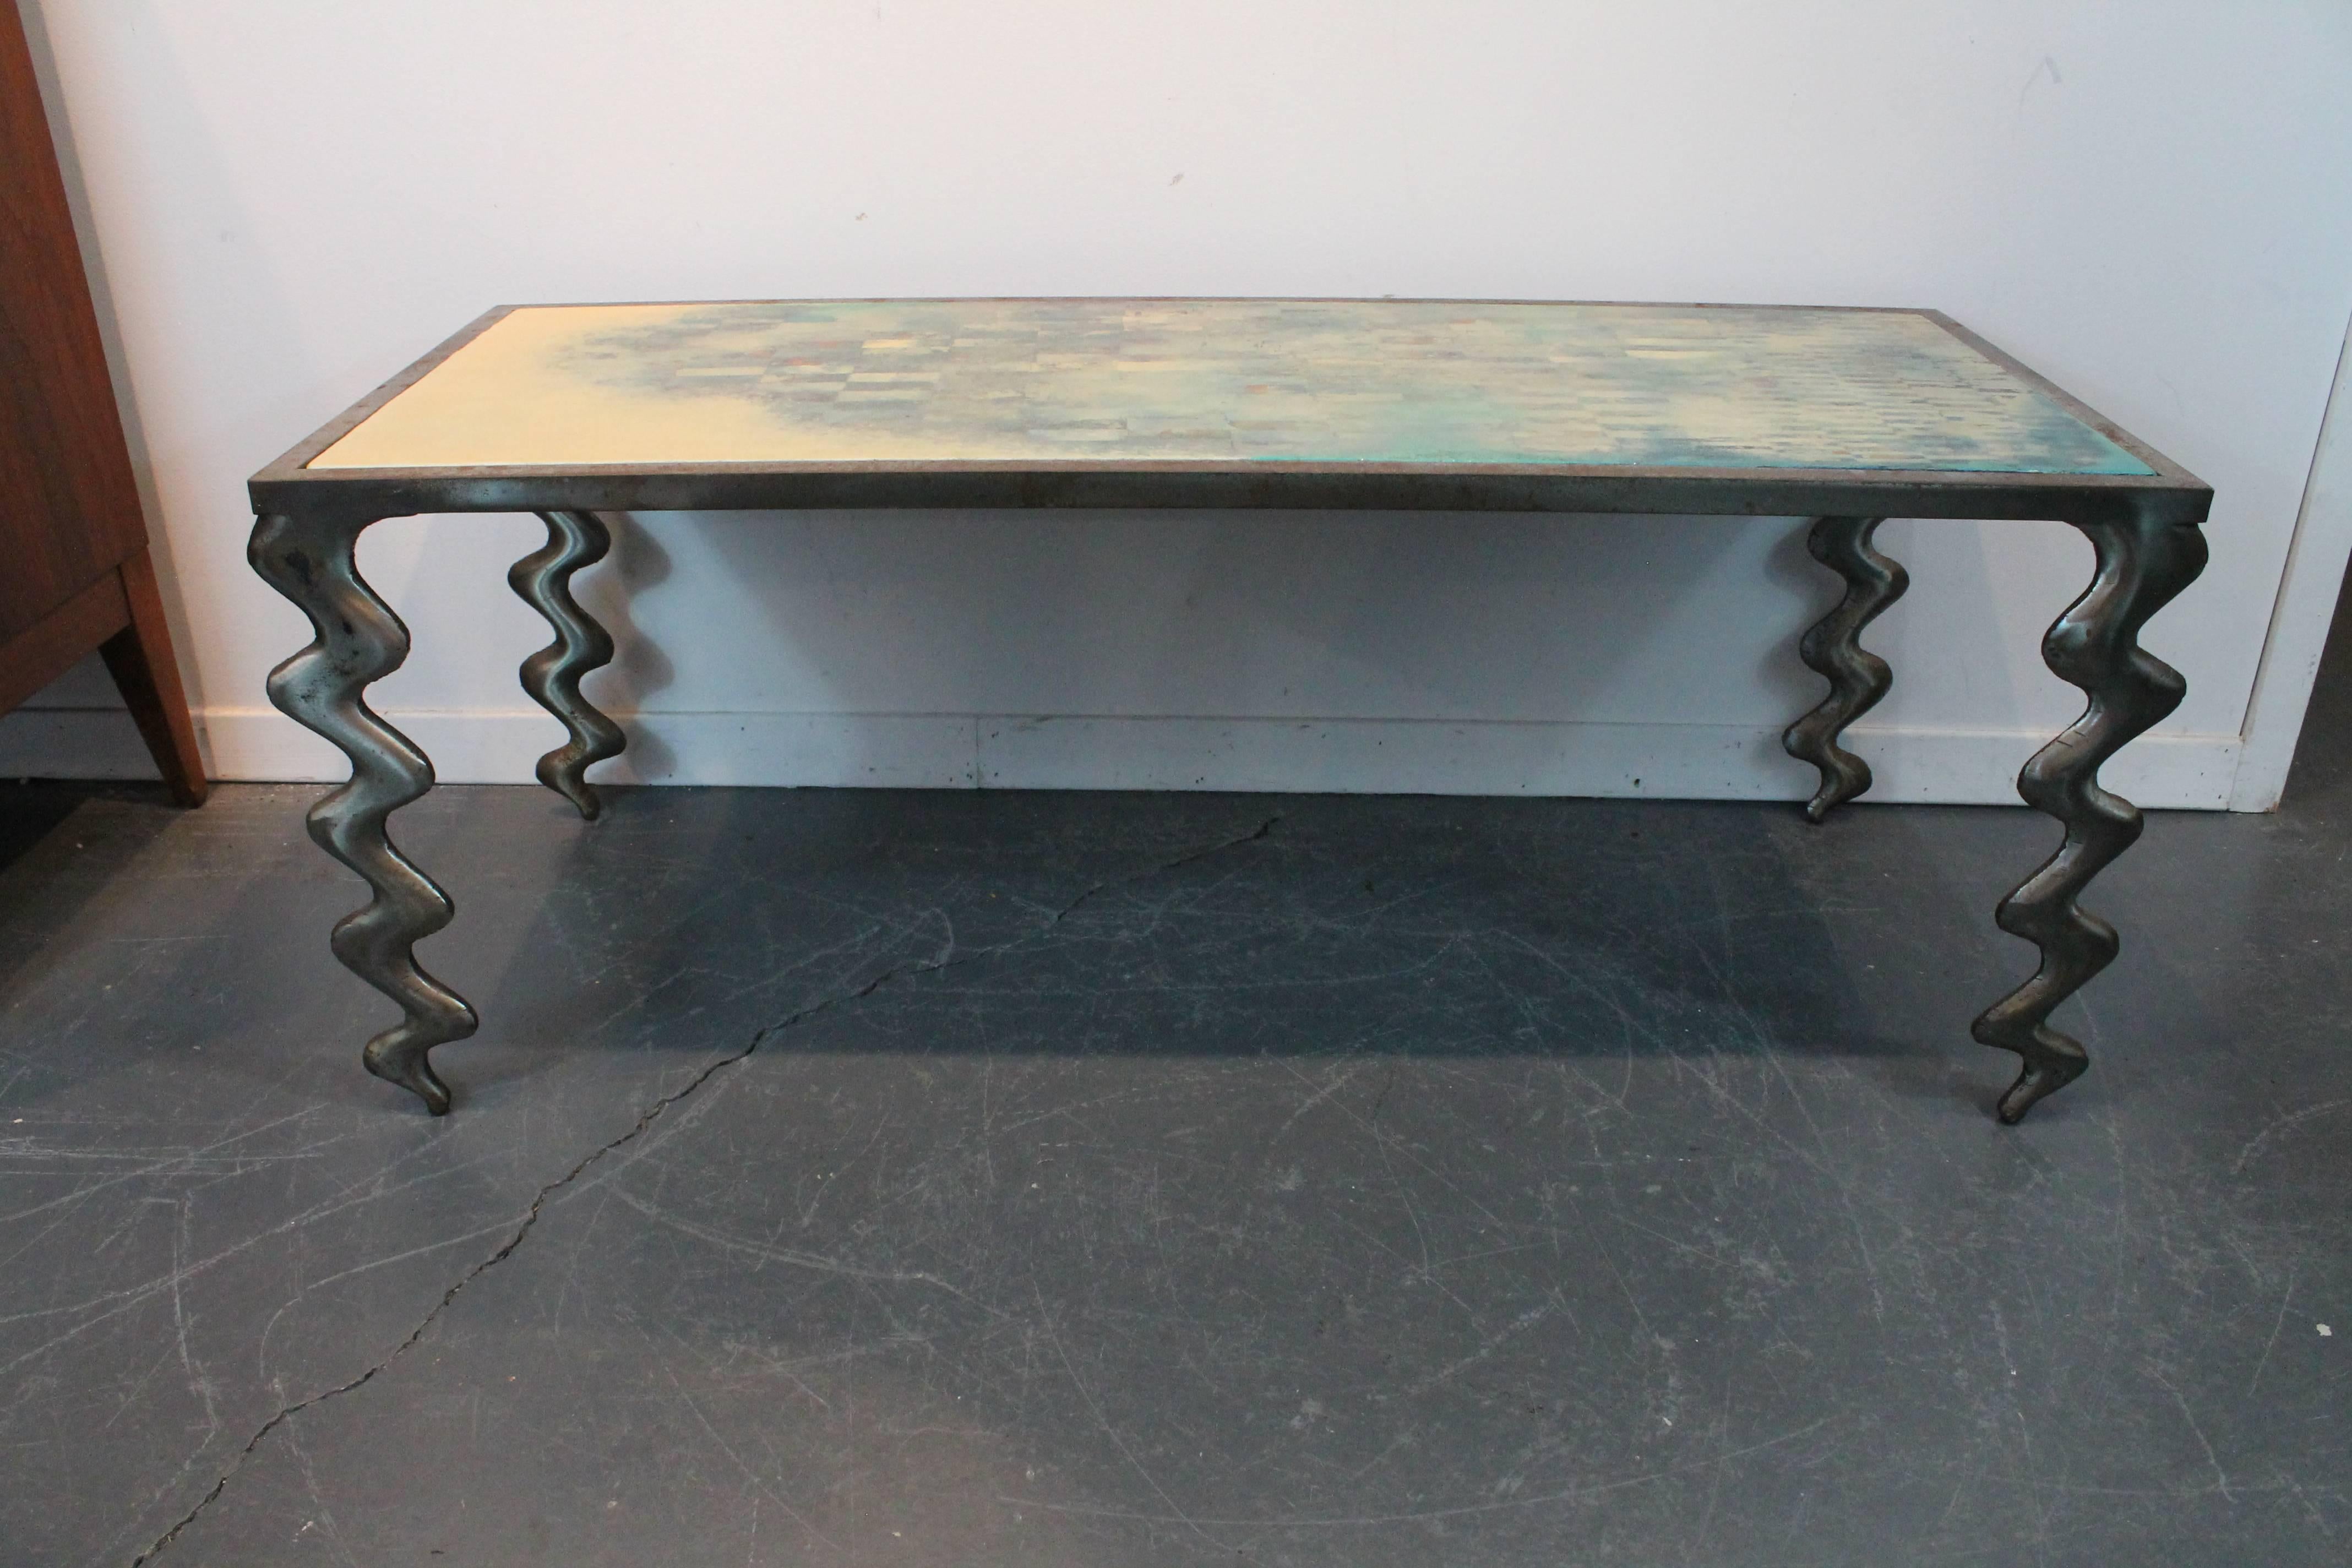 Iron sculptural cocktail table with a painted wood Modernist top. 
The tabletop rests inside of the iron frame and features a wonderful Modernist grid like composition.
Signed on the bottom of the table top 